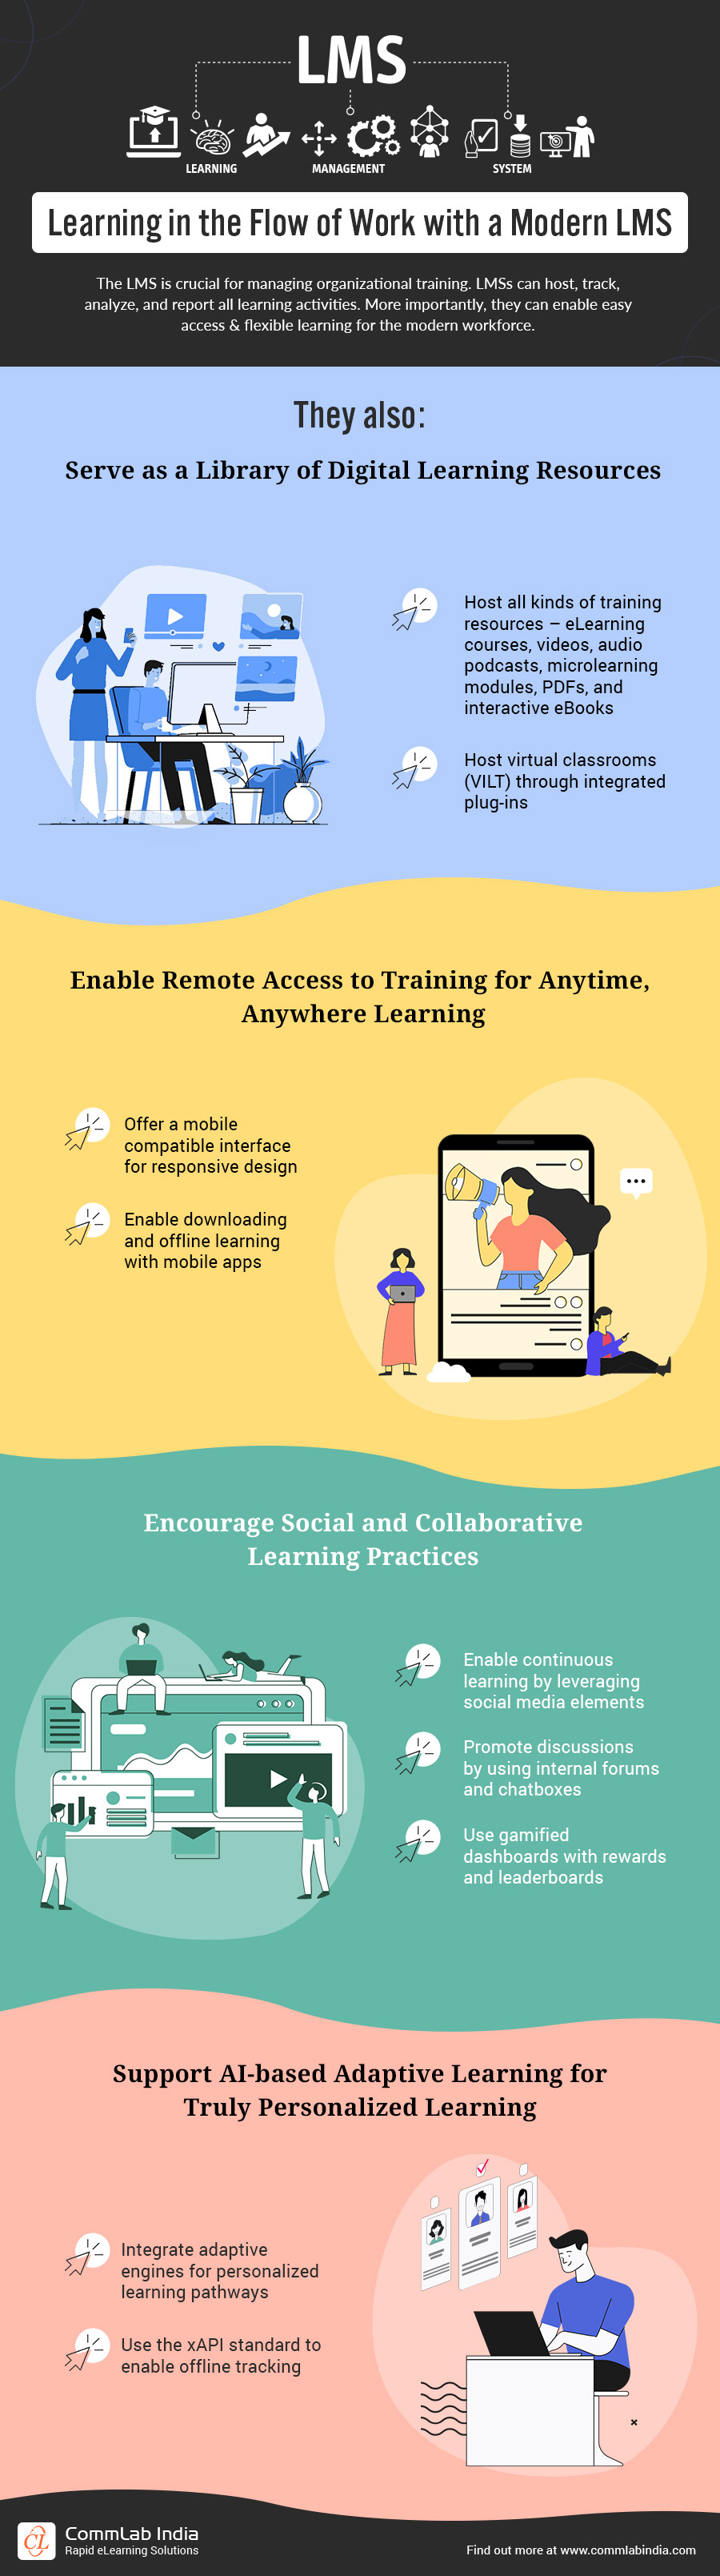 LMS: Easy, Flexible Learning for the Modern Workforce